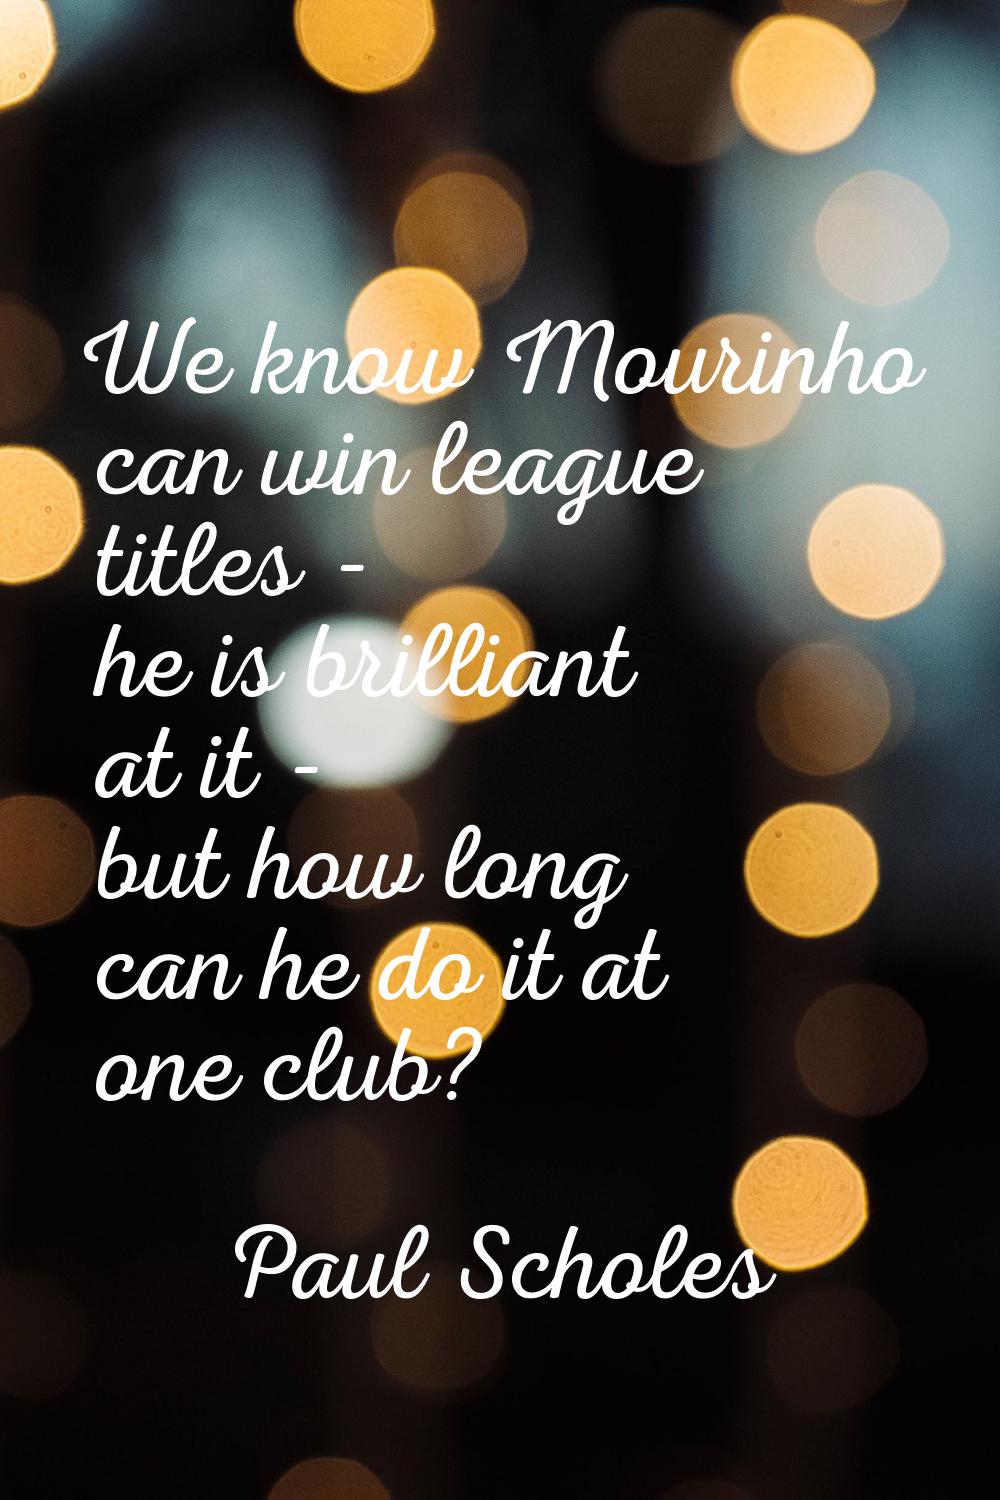 We know Mourinho can win league titles - he is brilliant at it - but how long can he do it at one c